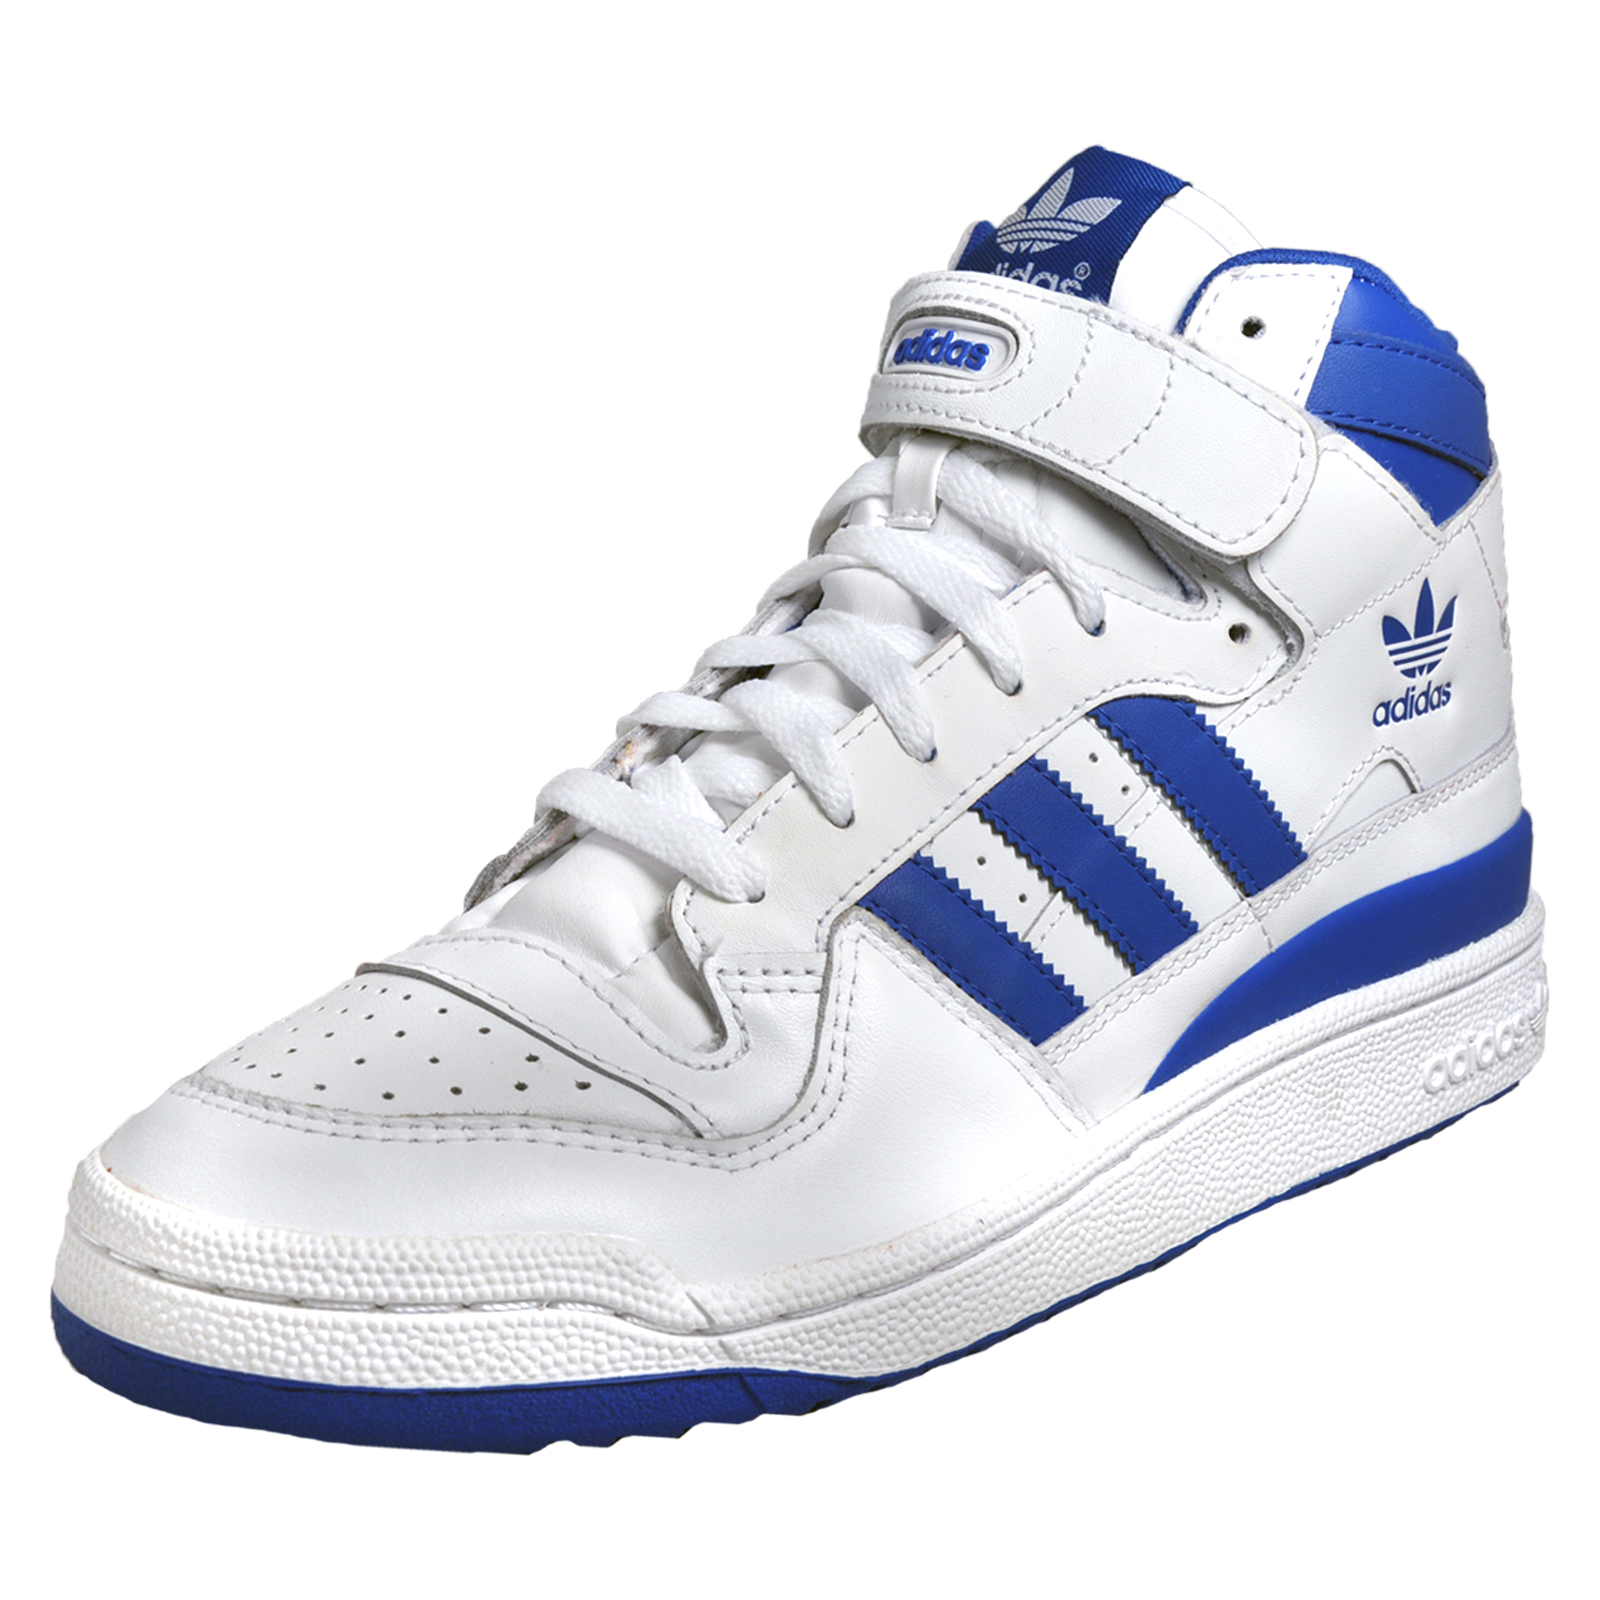 Adidas Originals Forum Mid Mens Basketball Shoes Casual Court Trainers ...